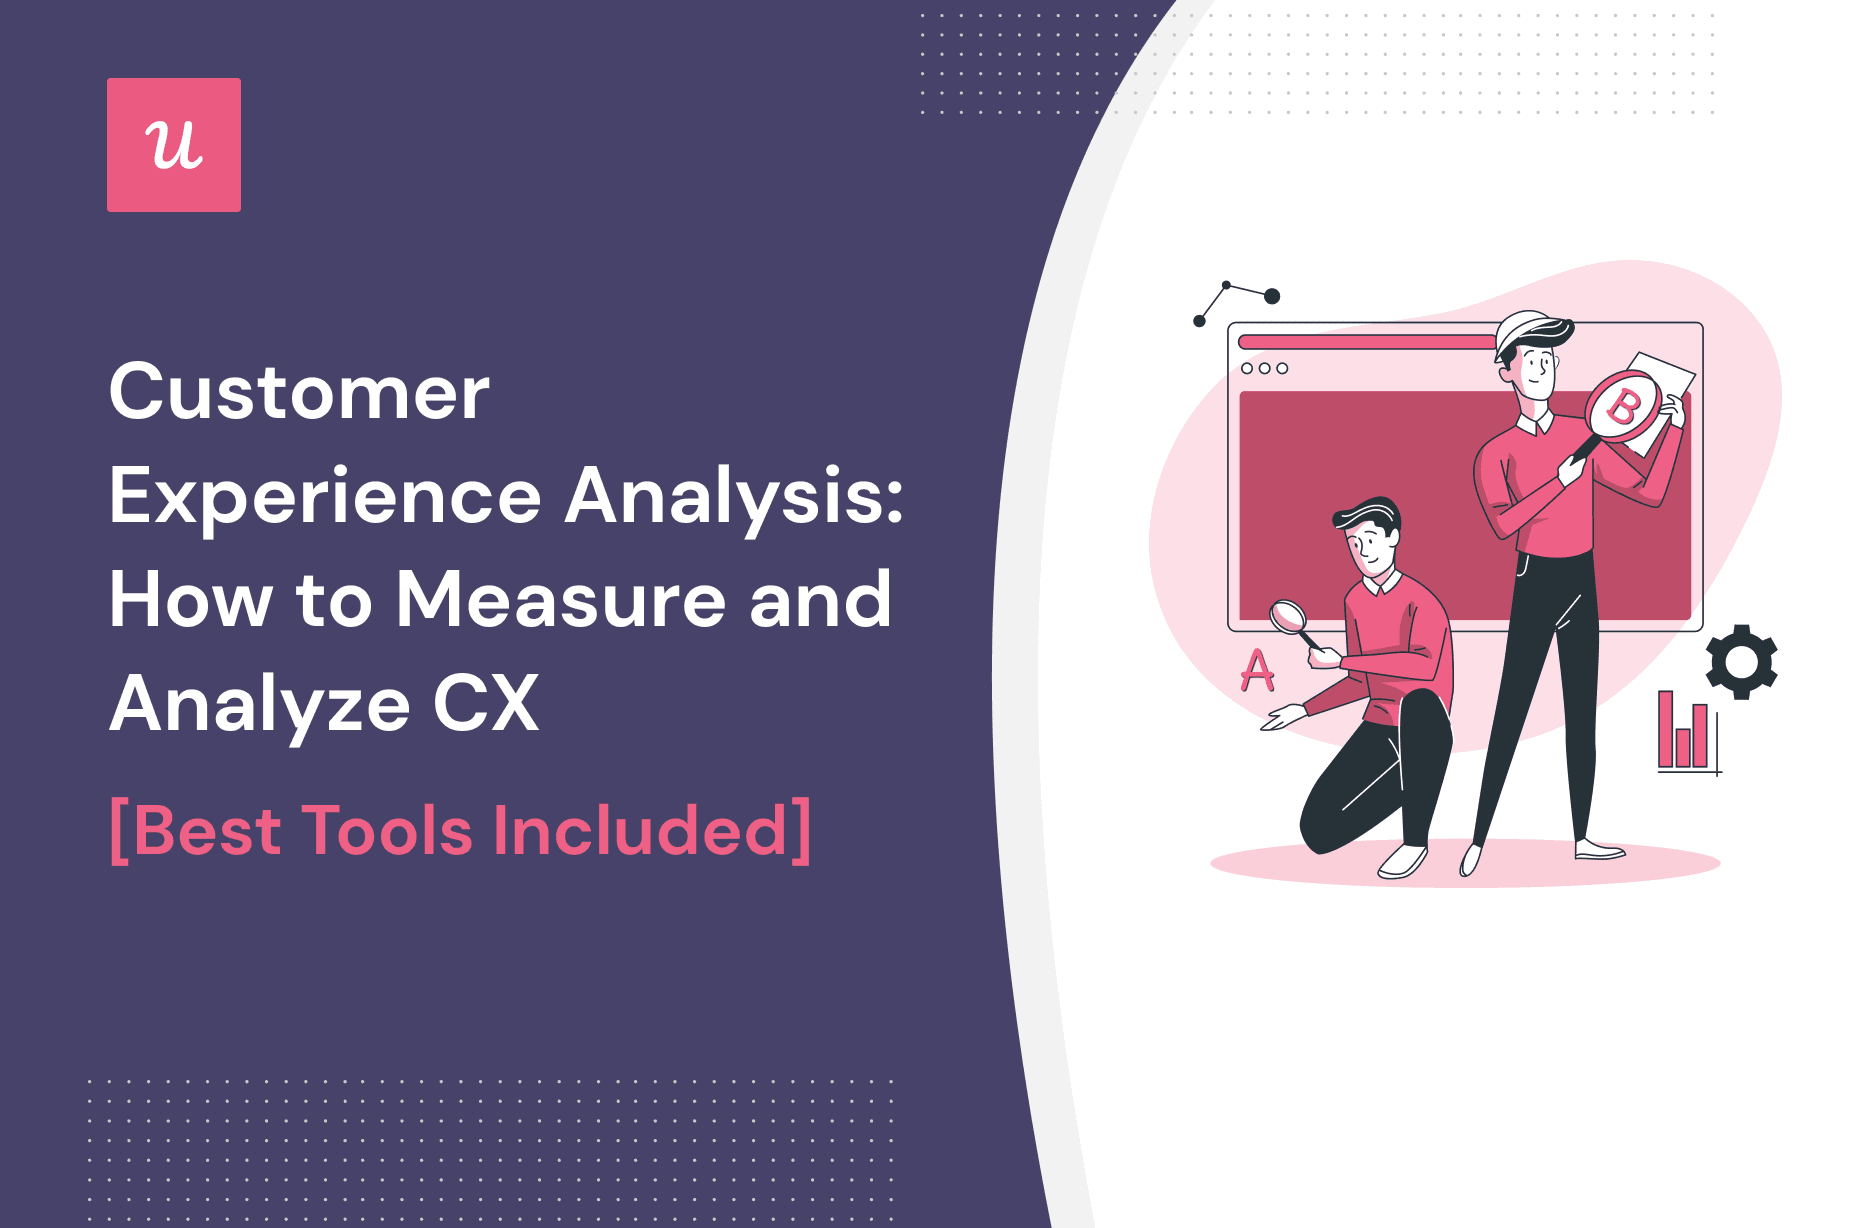 Customer Experience Analysis: How To Measure and Analyze CX [Best Tools Included] cover